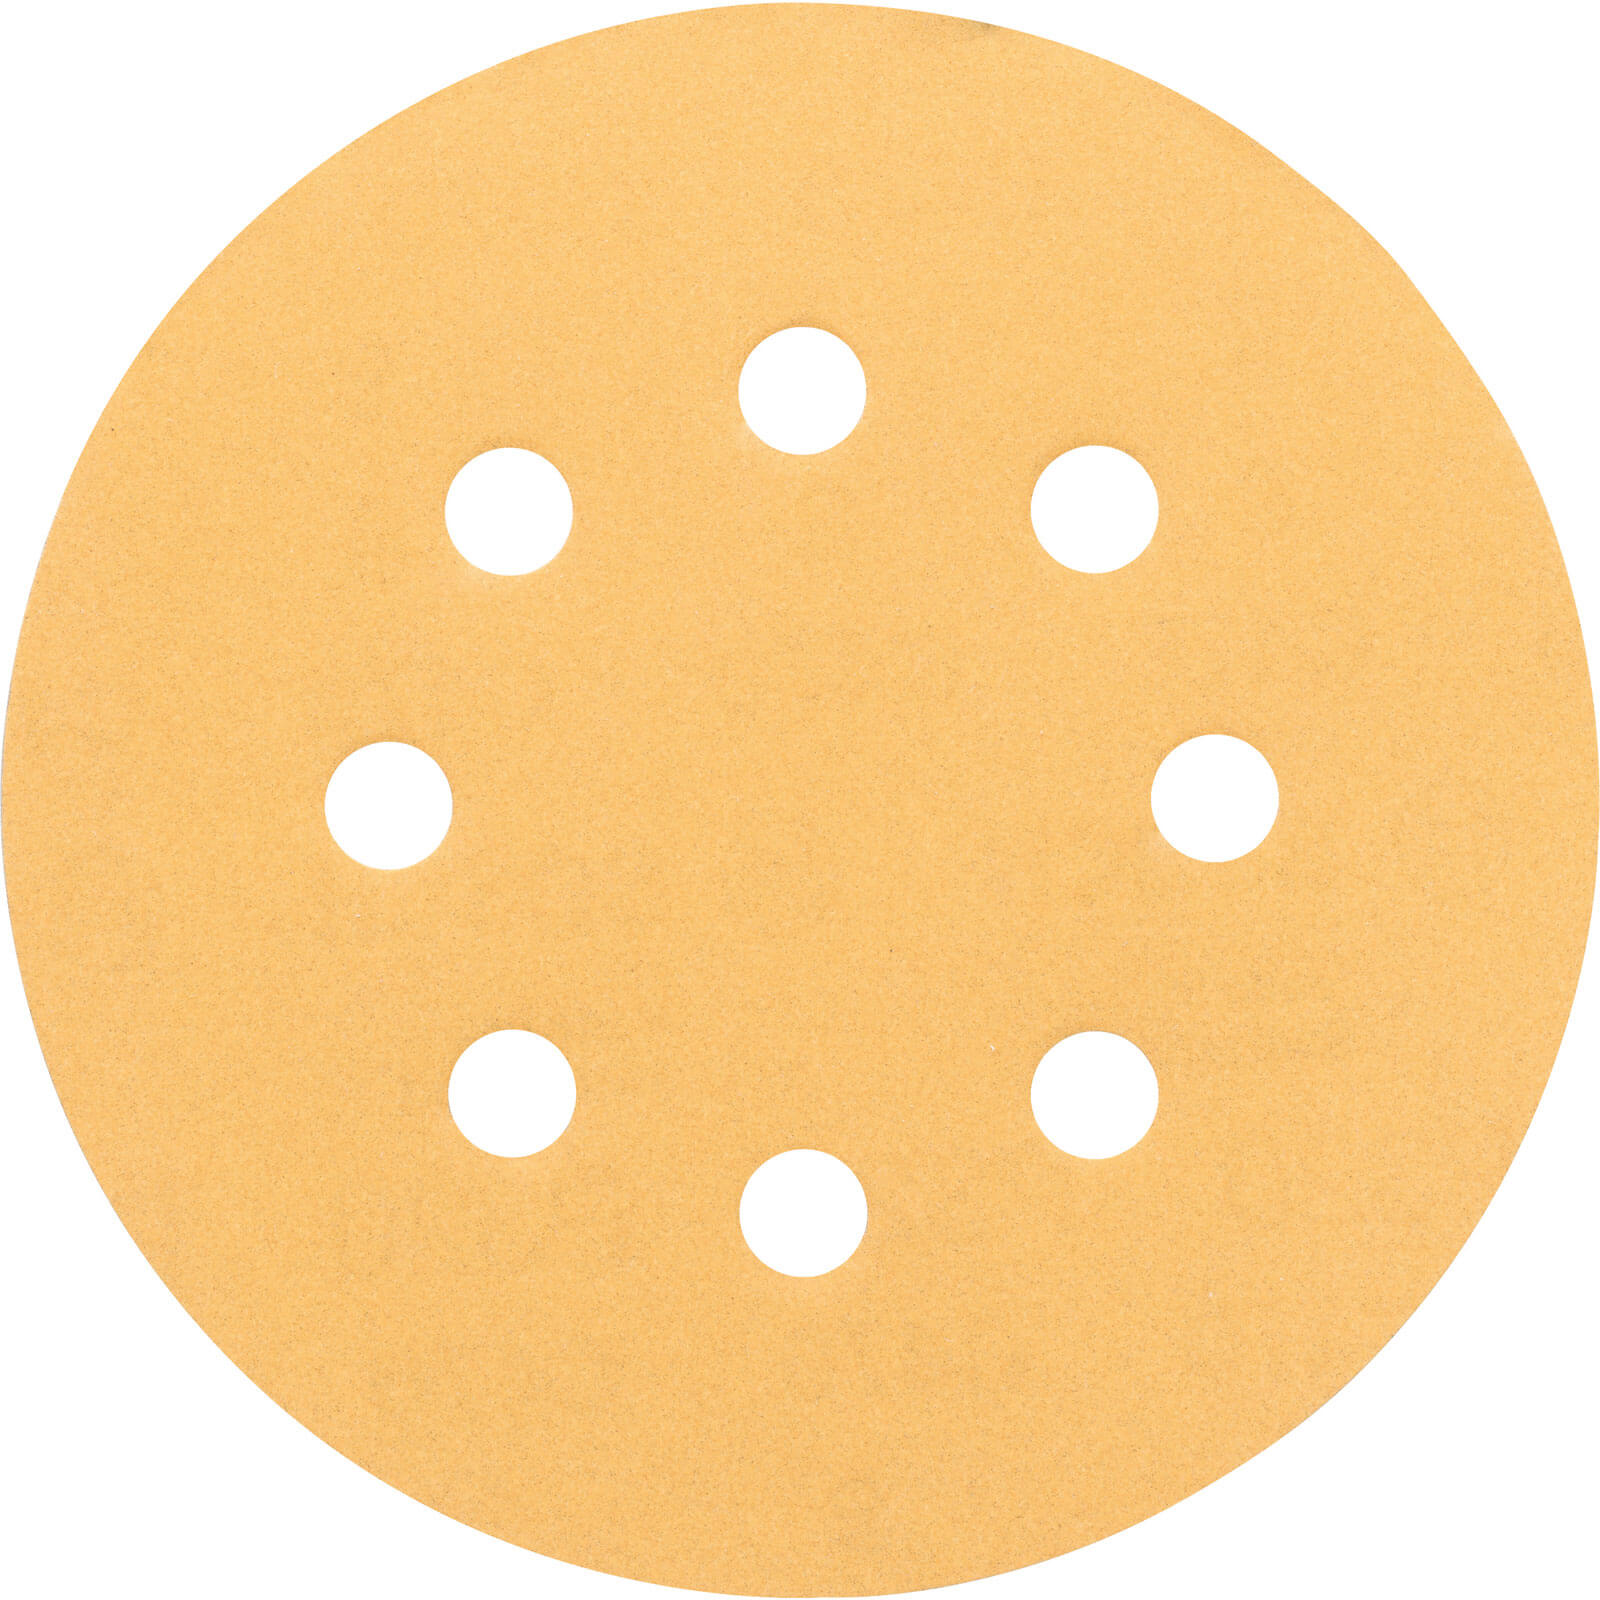 Photo of Bosch 125mm C470 Wood Sanding Disc 125mm Assorted Pack Of 6